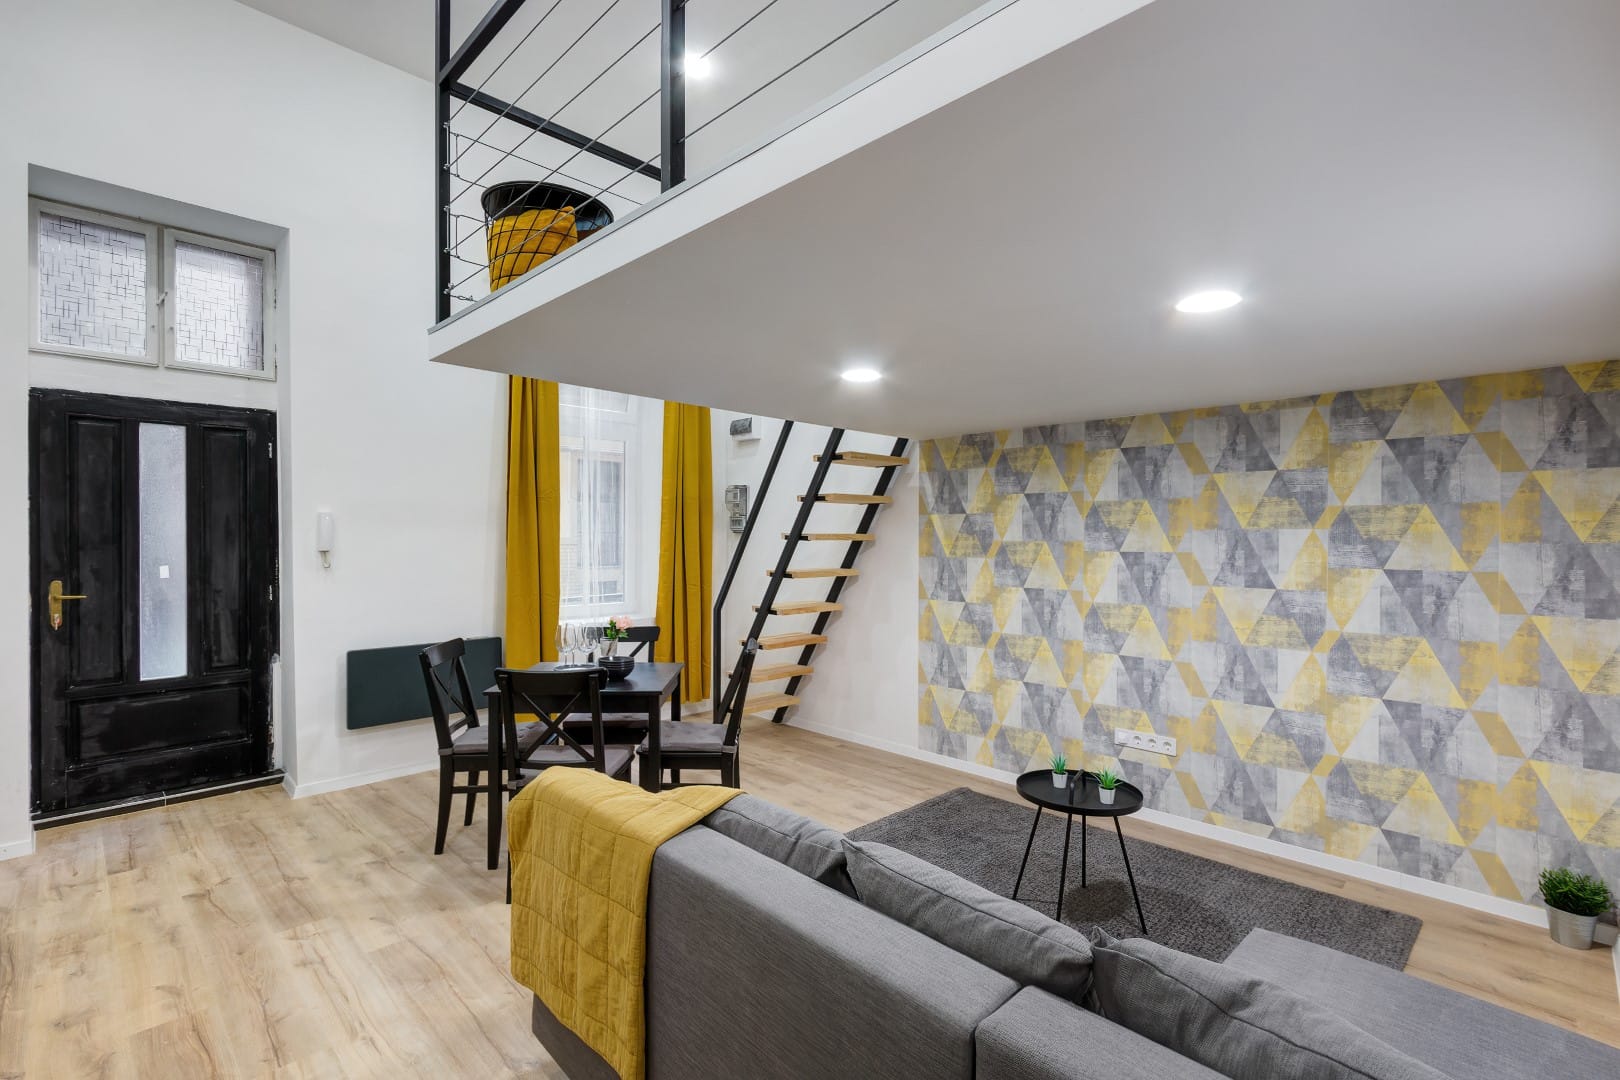 budapest-apartments-for-sale-renovated-flat-for-sale-downtown-real-estate-budapest-brand-new-studio-apartment-for-sal5